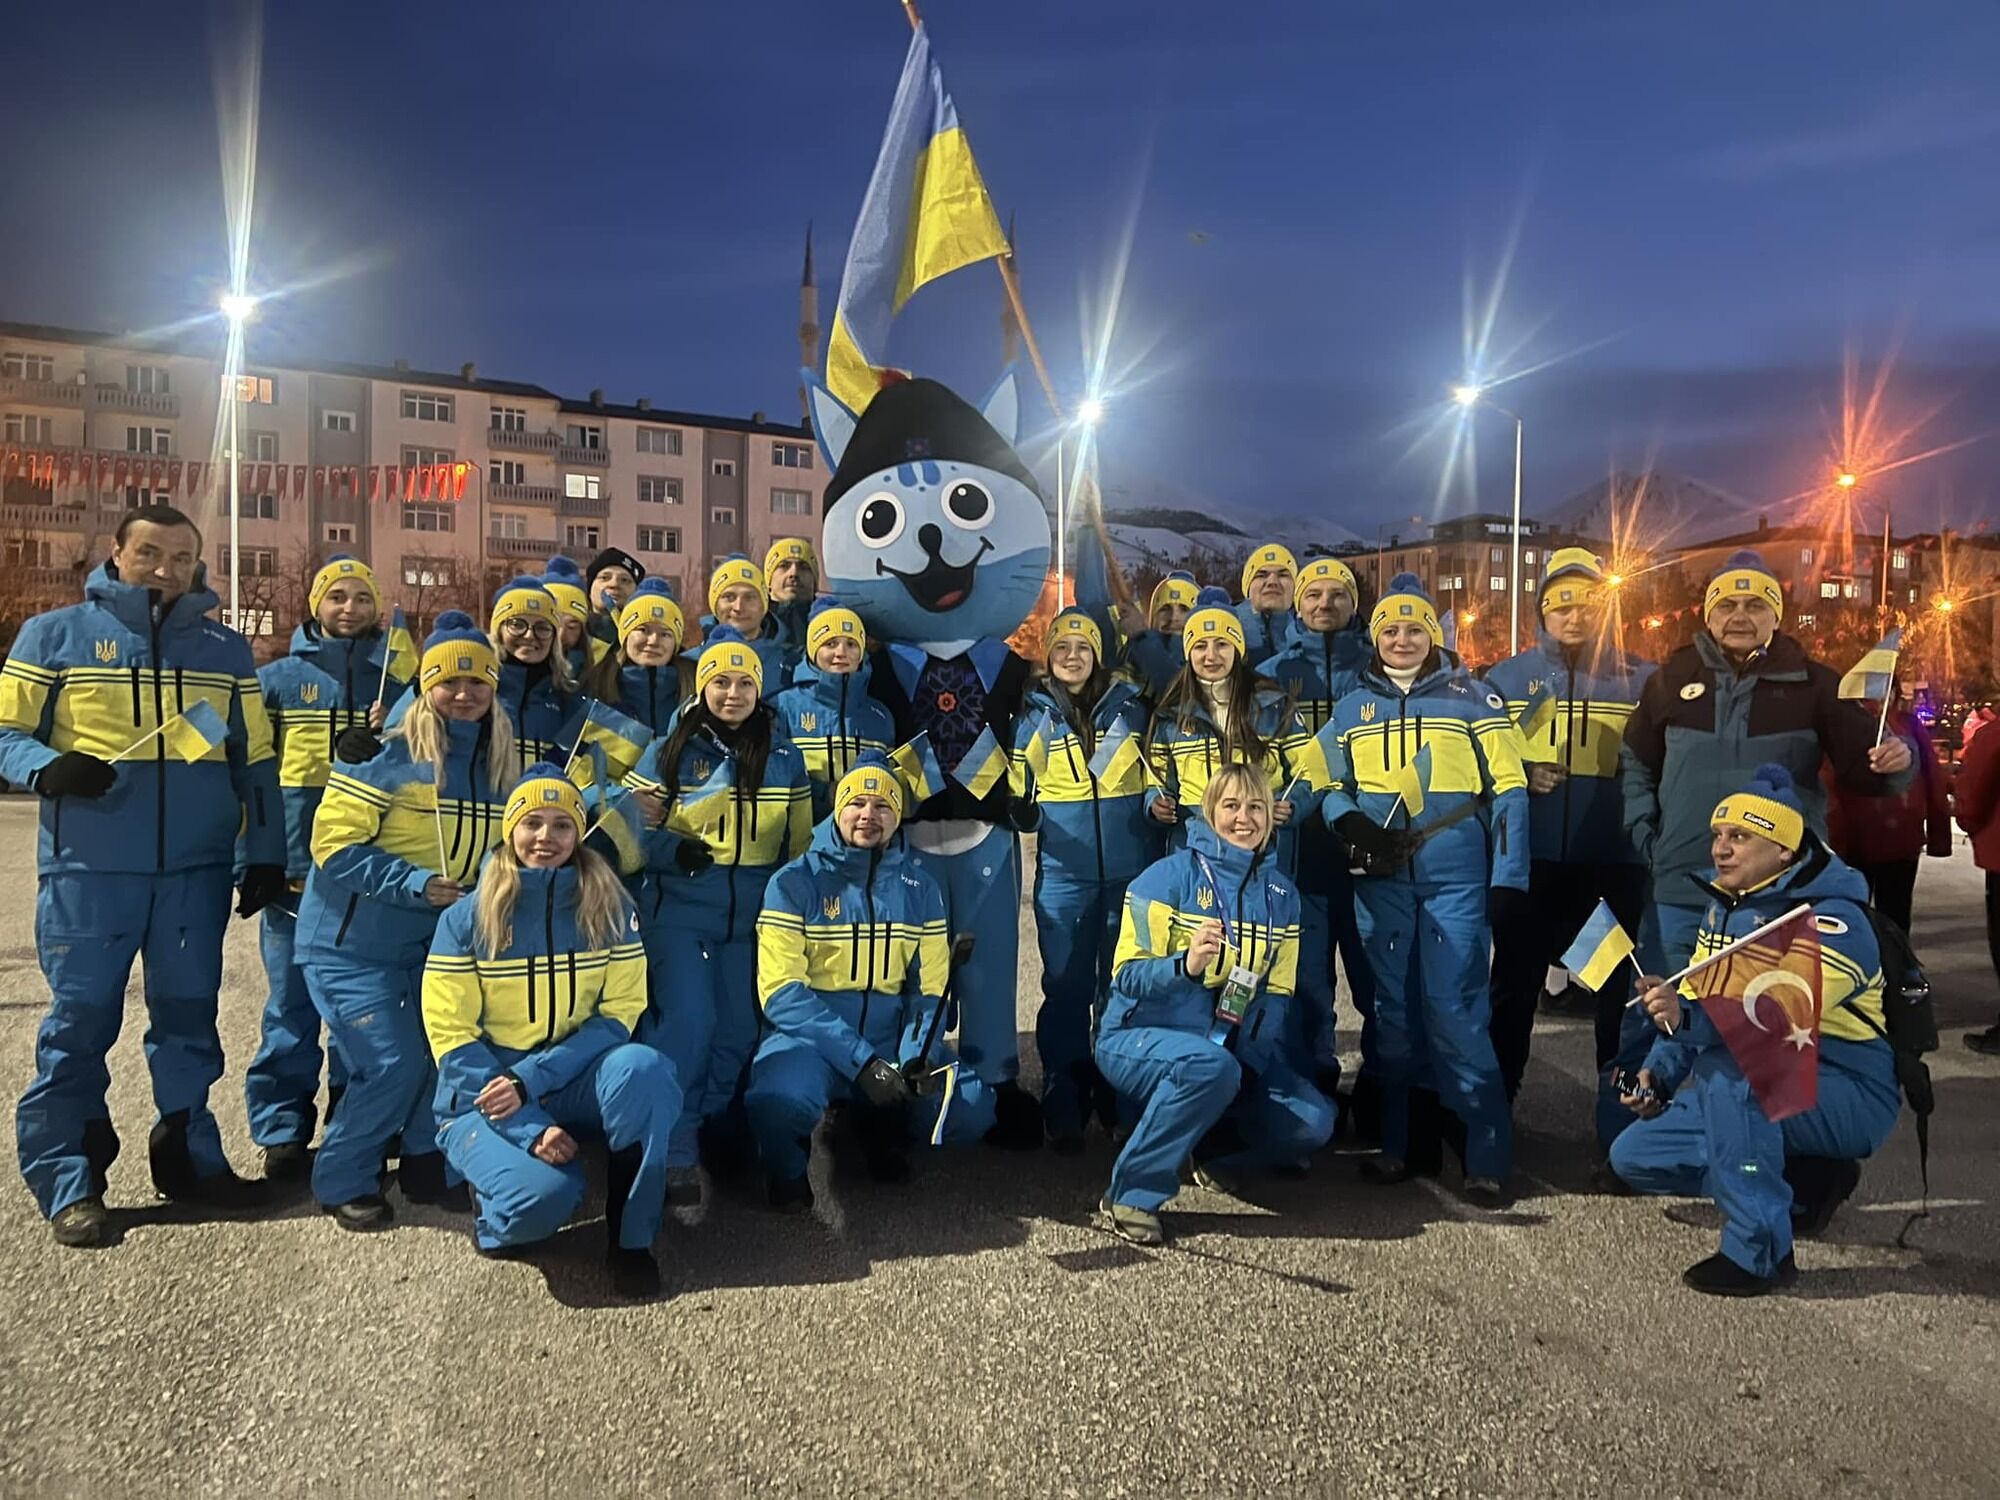 The best among all countries! Ukraine won the medal standings of the Winter Deaflympics for the first time in history